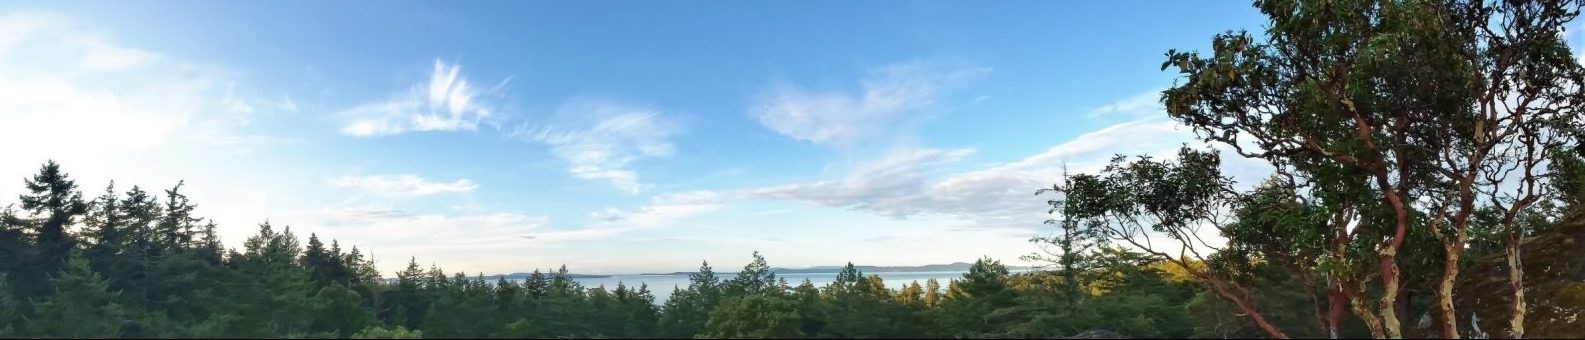 Wide photo with ocean peaking through a fir forest canopy. Blue sky with six wispy clouds. Arbutus in right foreground.